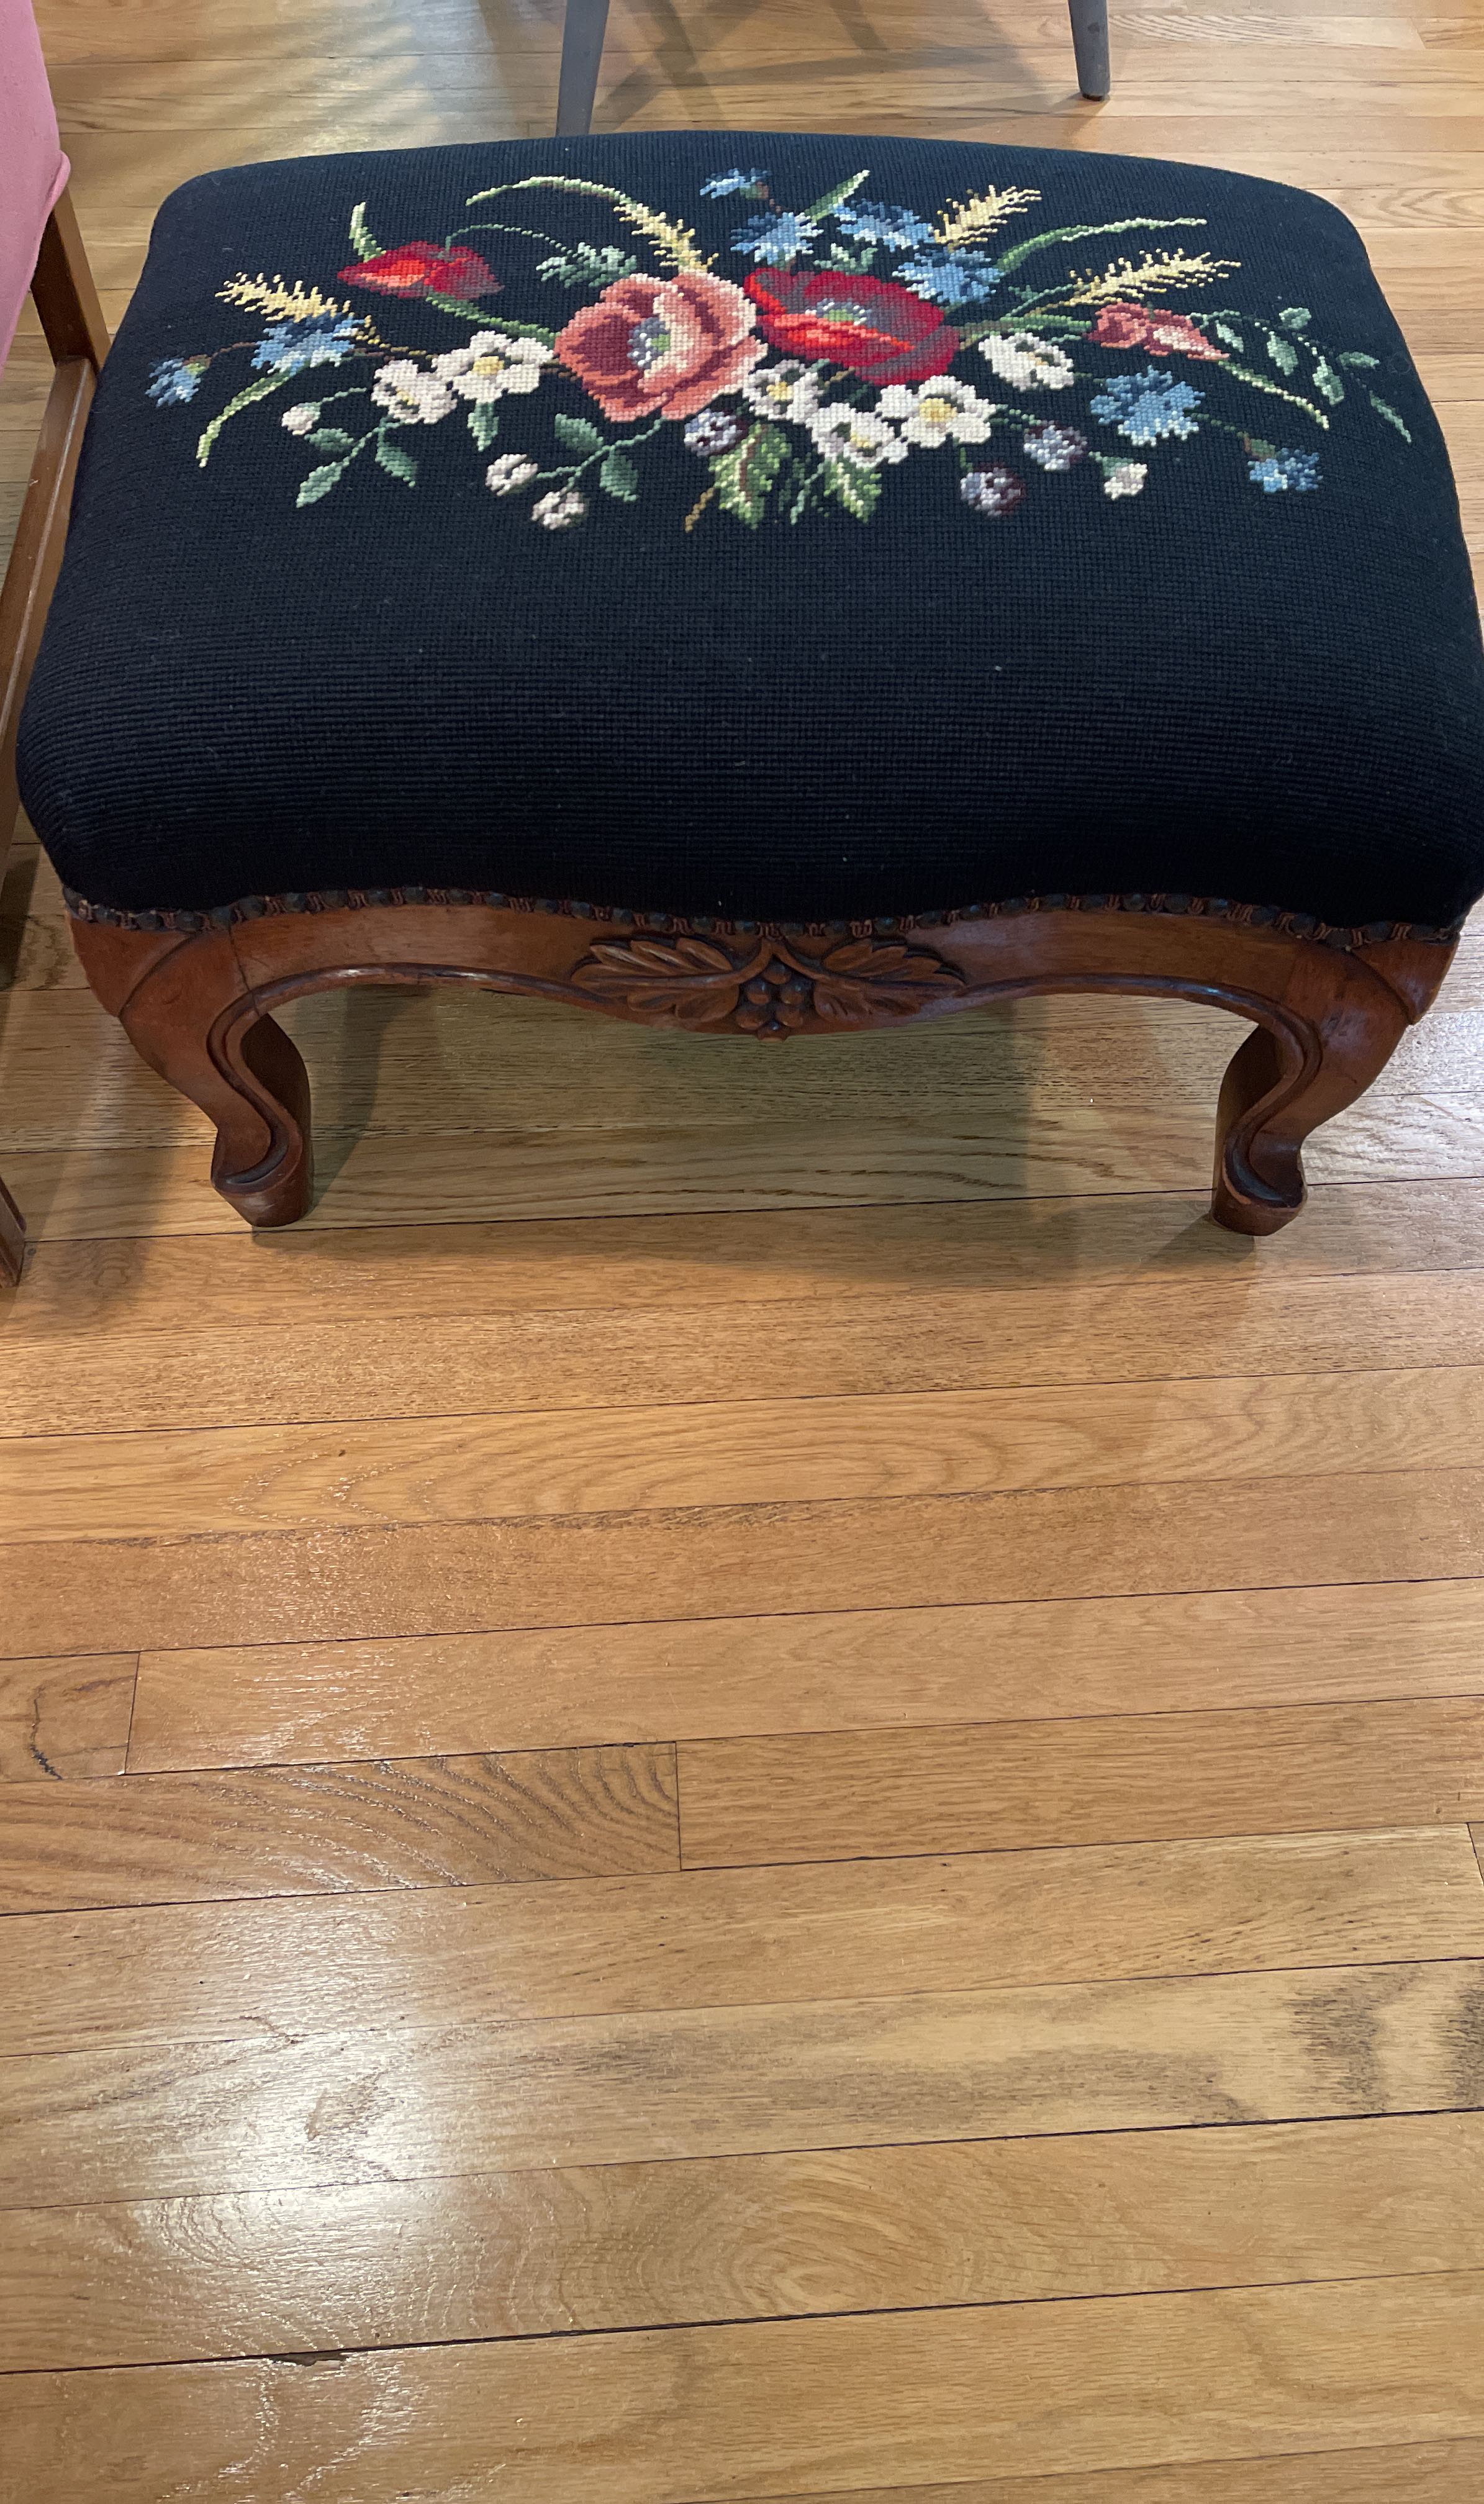 At Auction: DIRECTIONAL ROLLING OTTOMAN FOOTSTOOL. UNMARKED